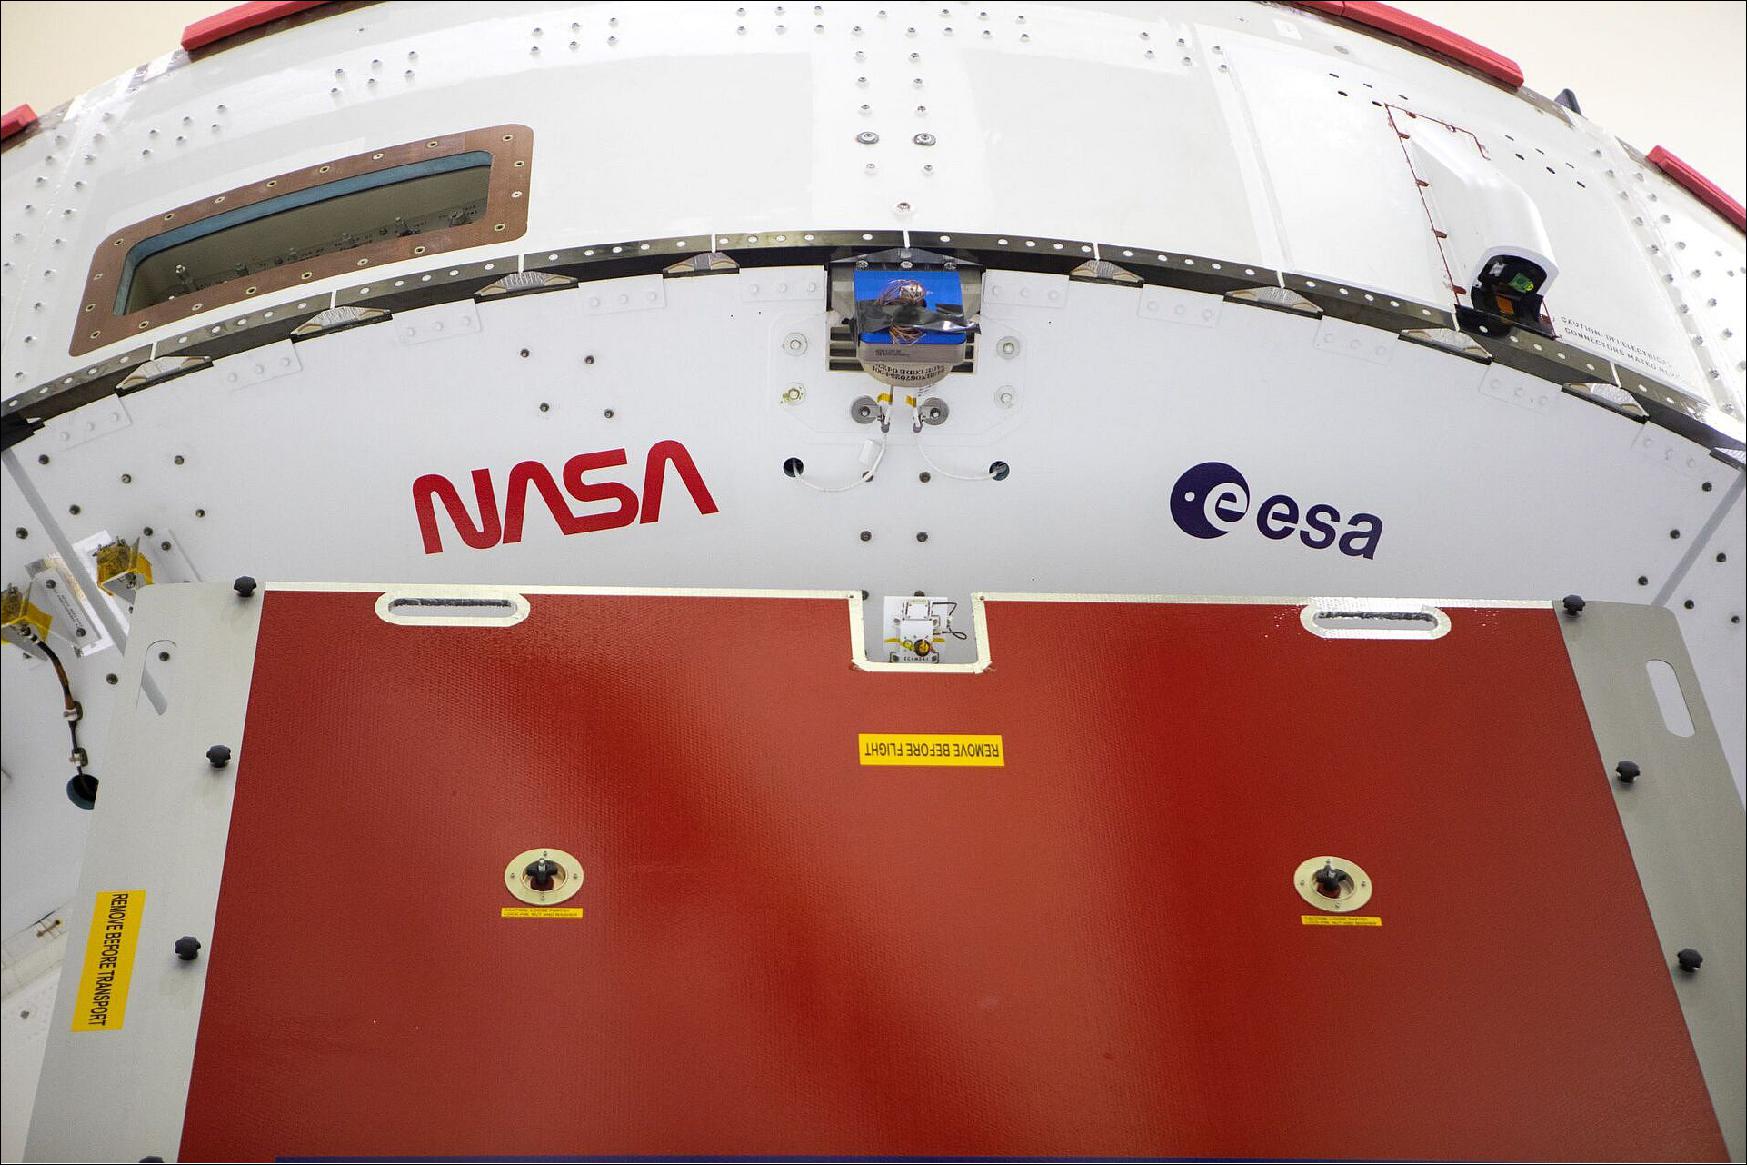 Figure 36: Logos on Orion. The space agency logos for the next spacecraft to head to the Moon have been added to Orion as part of the Artemis program. ESA’s logo reflects our European nature and our pioneering activities in space. NASA’s ‘worm’ design was officially introduced in 1975 and was incorporated into many of the agency’s next-generation programs. It was retired in 1992, but made a comeback in 2020 as a new, modern era of human spaceflight becomes reality (image credit: NASA)